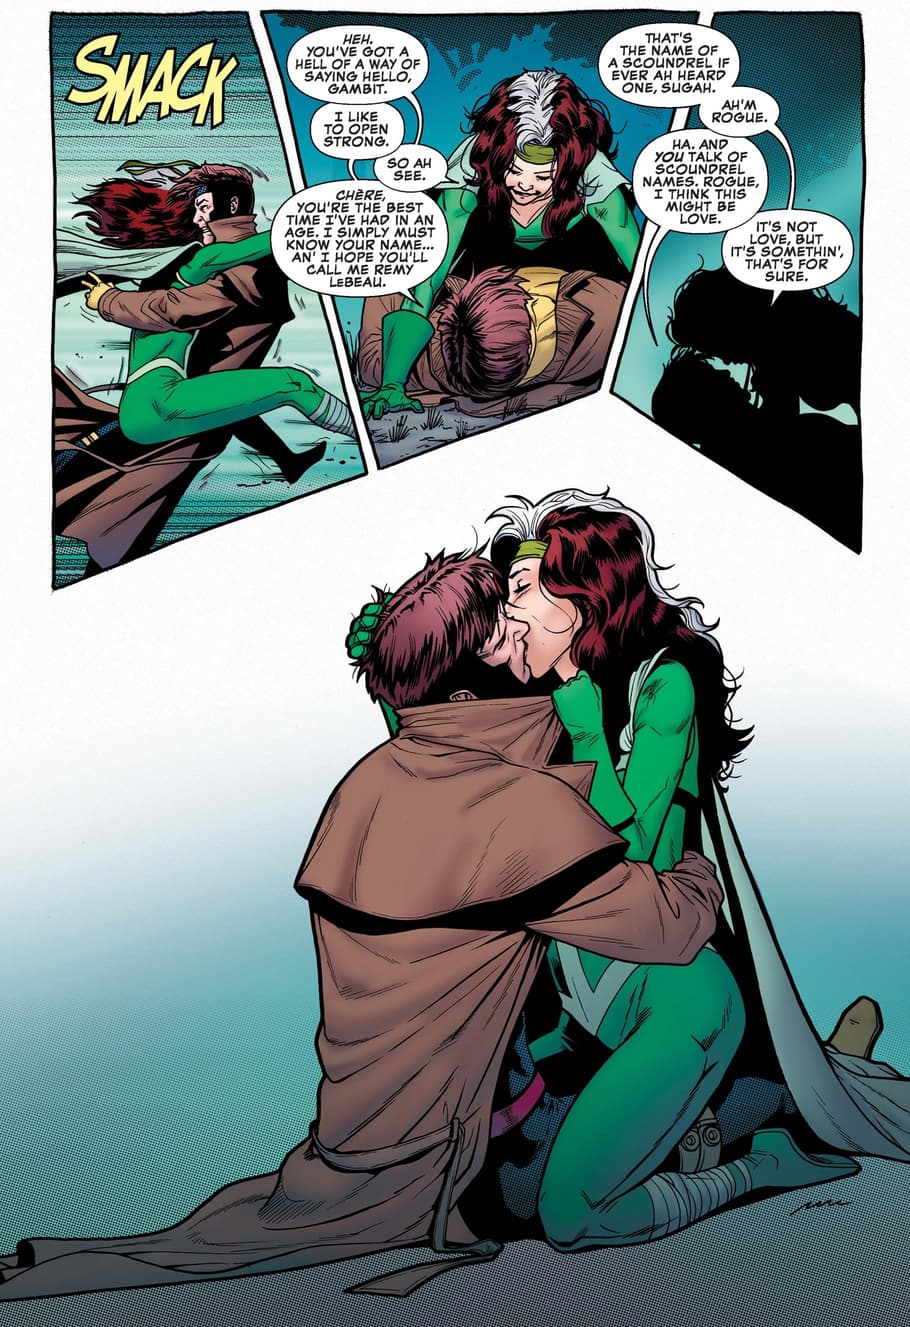 Gambit’s account of his first meeting with Rogue in ROGUE & GAMBIT (2018) #2.